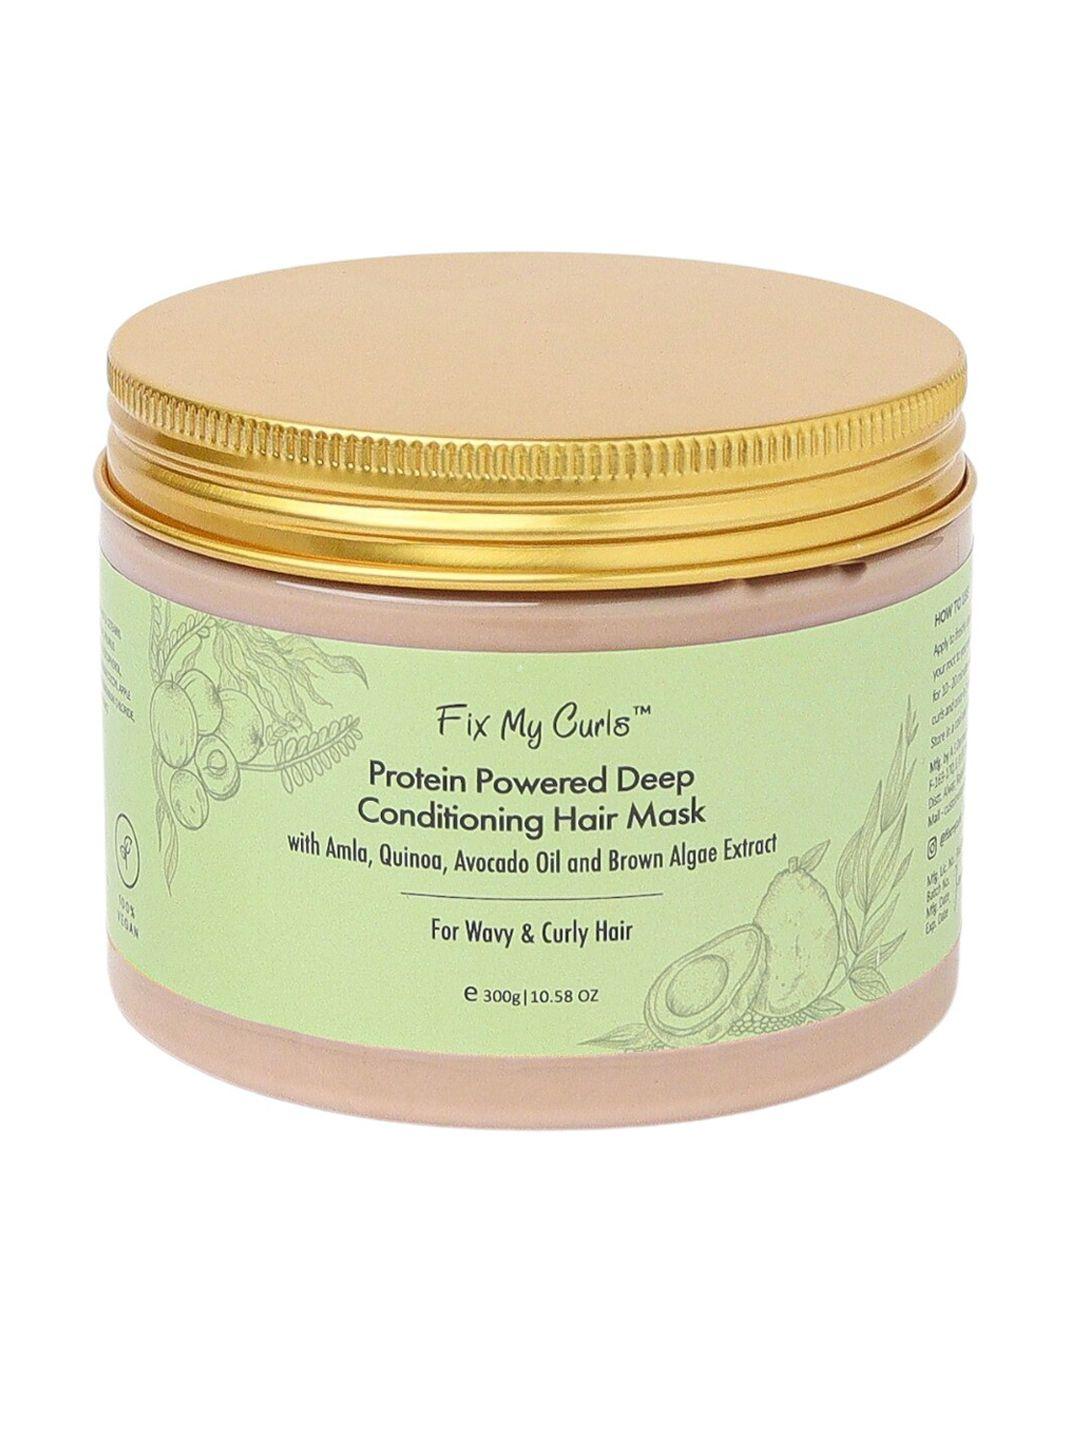 fix my curls protein powered deep conditioning mask -300ml